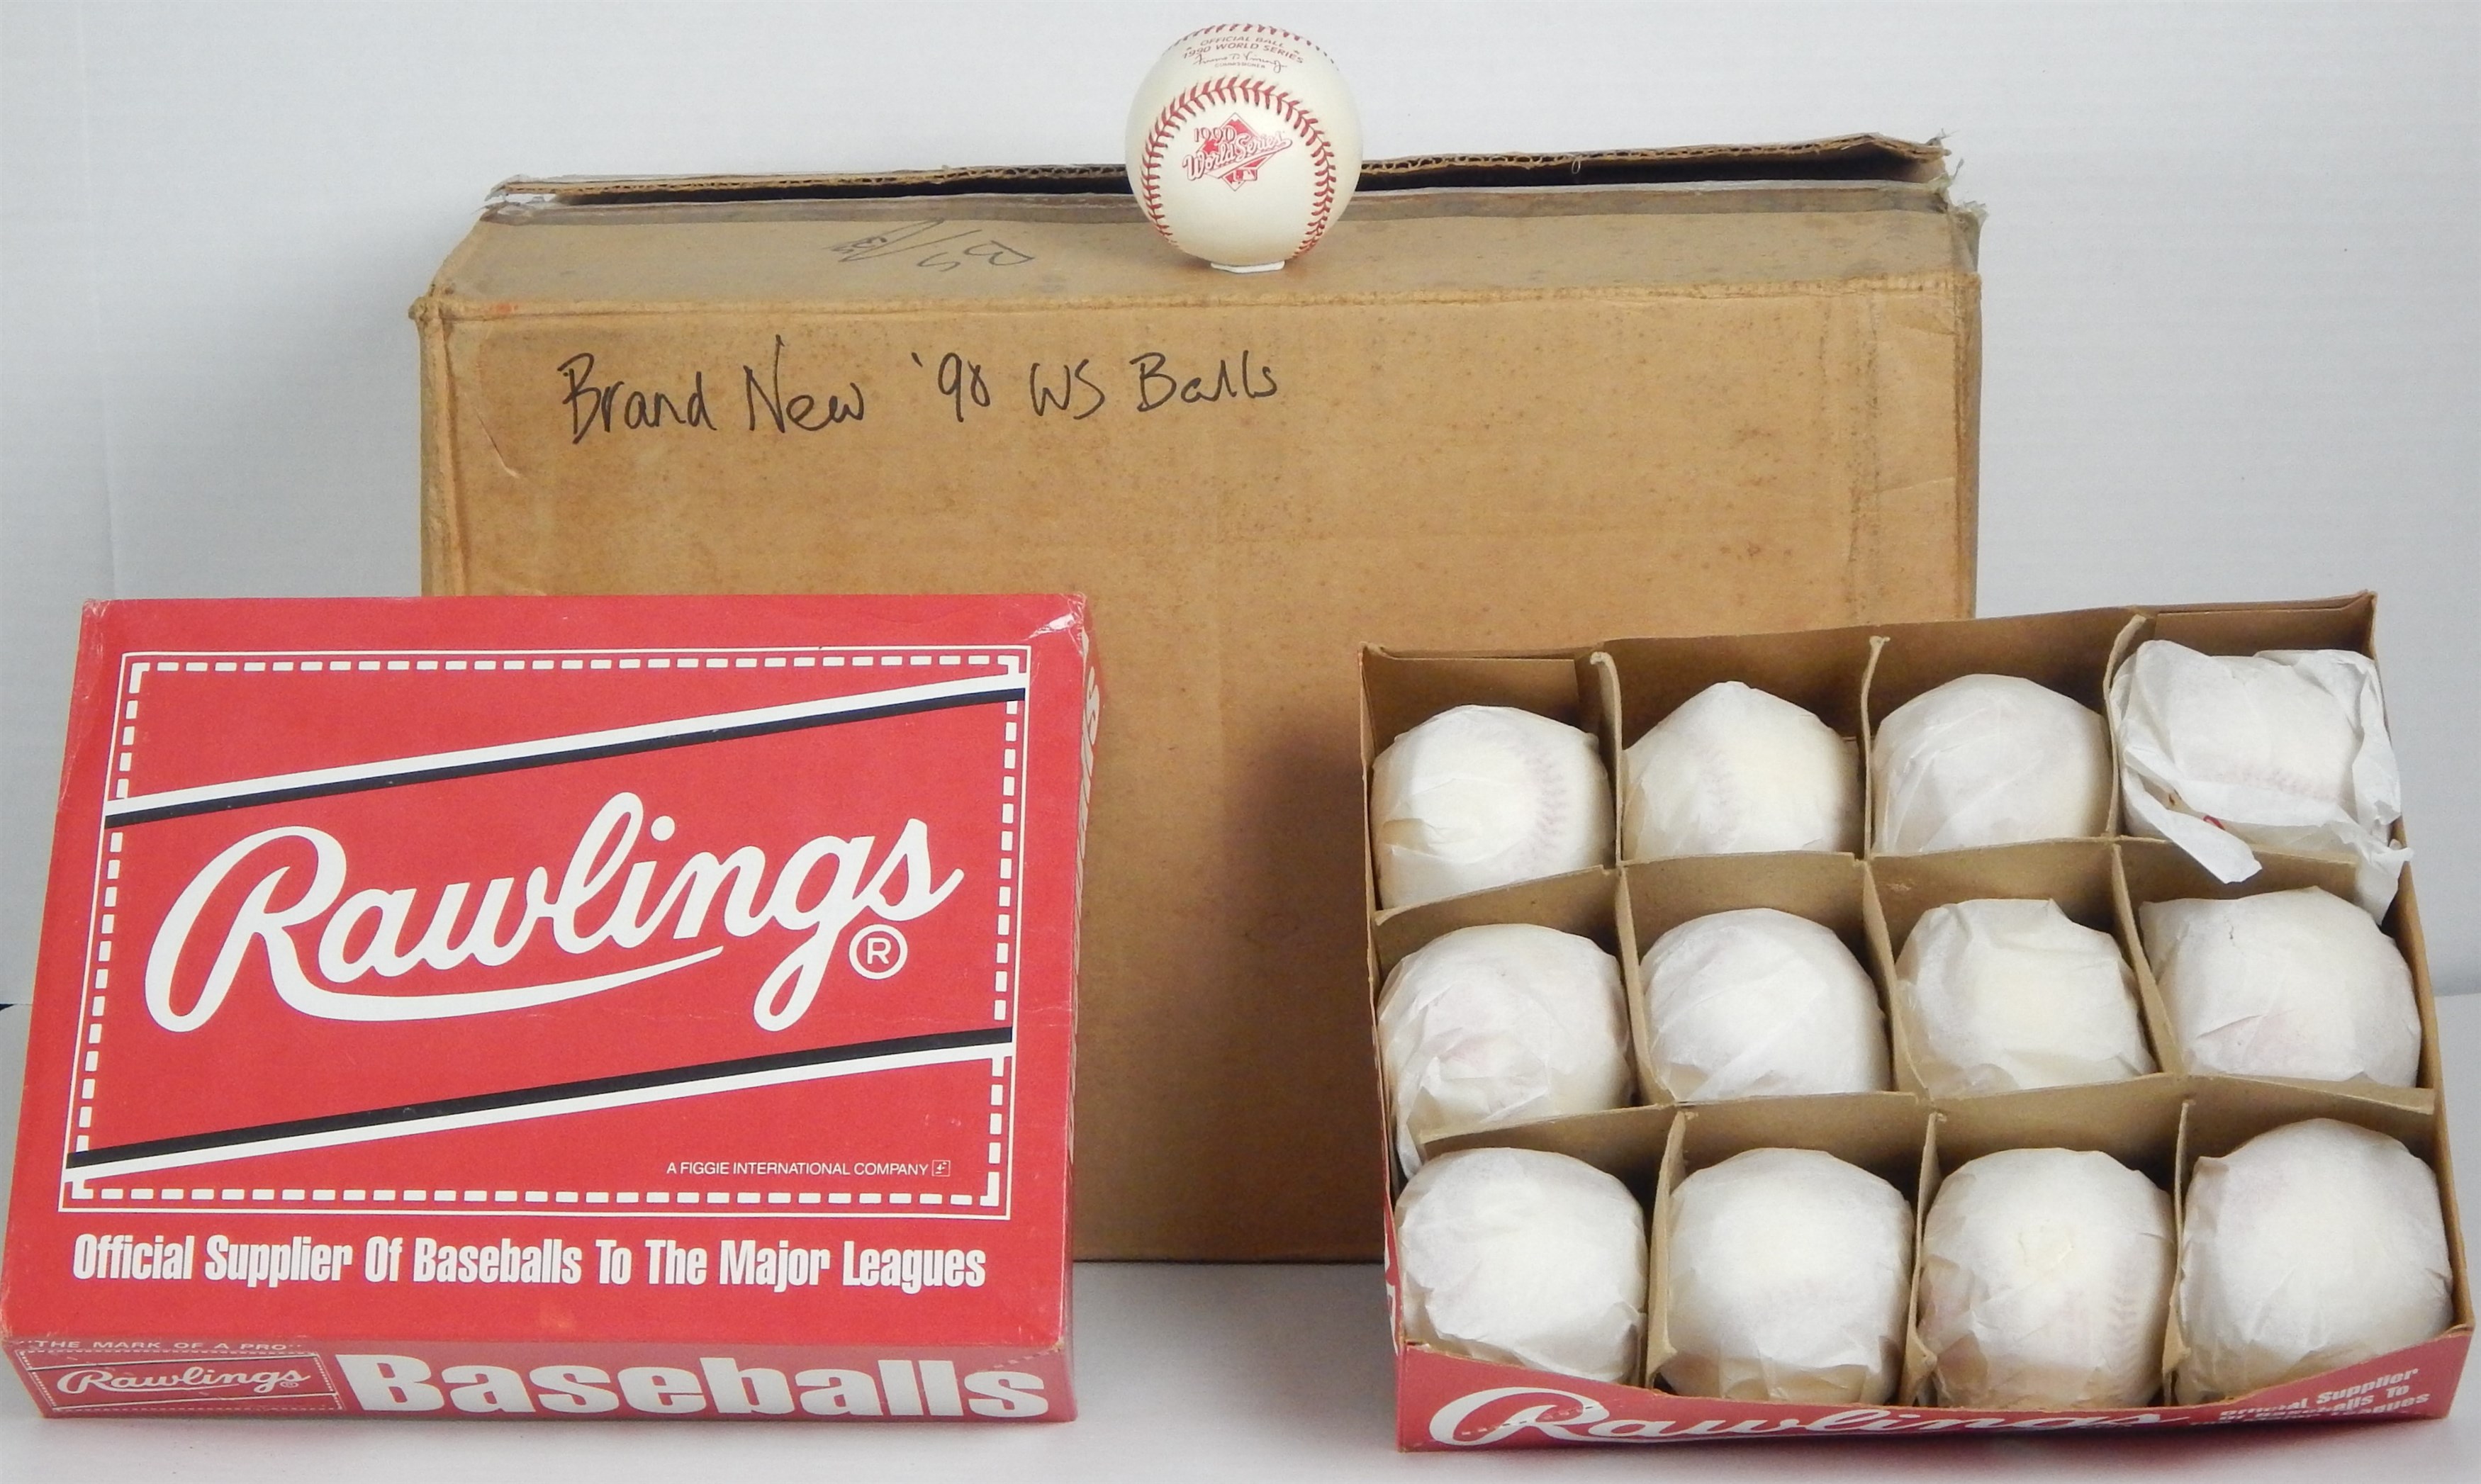 Baseball Memorabilia - 1990 World Series Case of Baseballs From The Bernie Stowe Collection